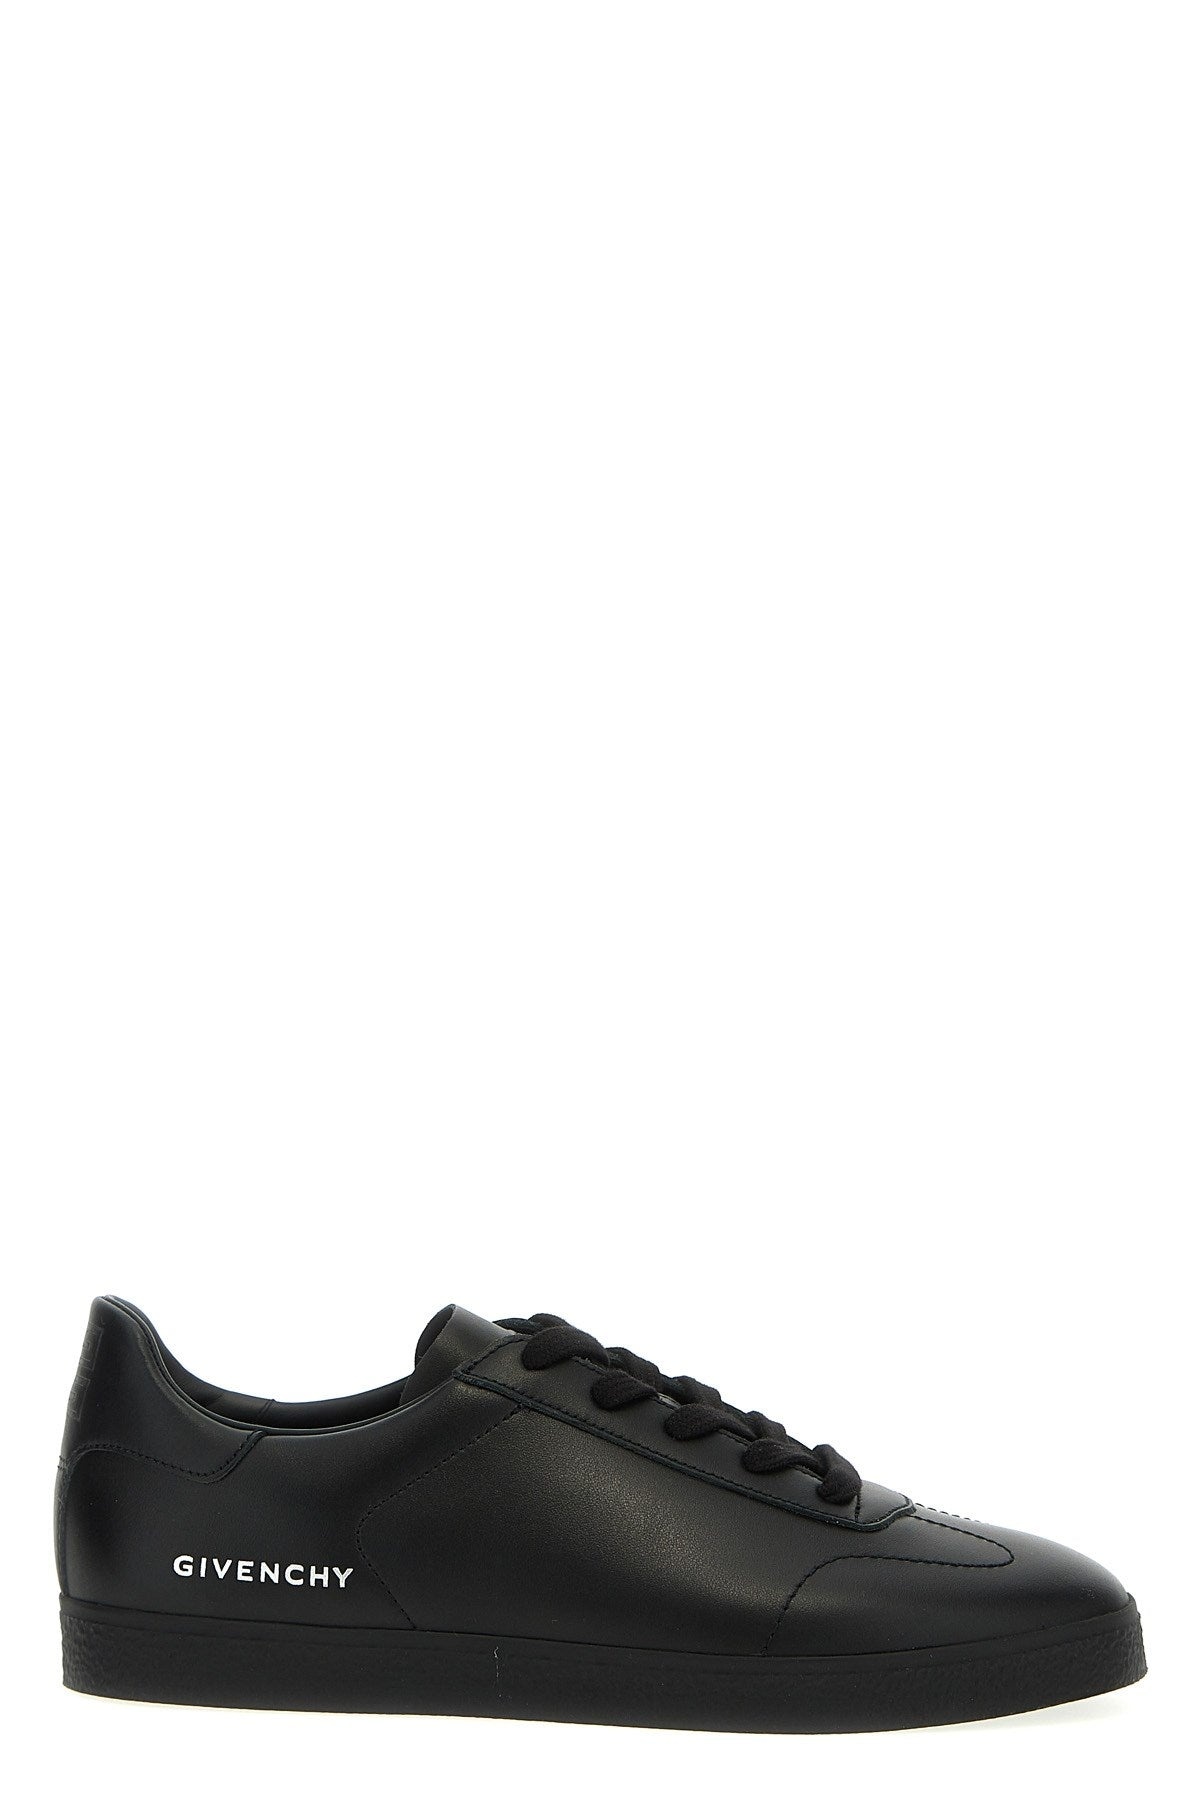 Givenchy Men 'Town' Sneakers - 1